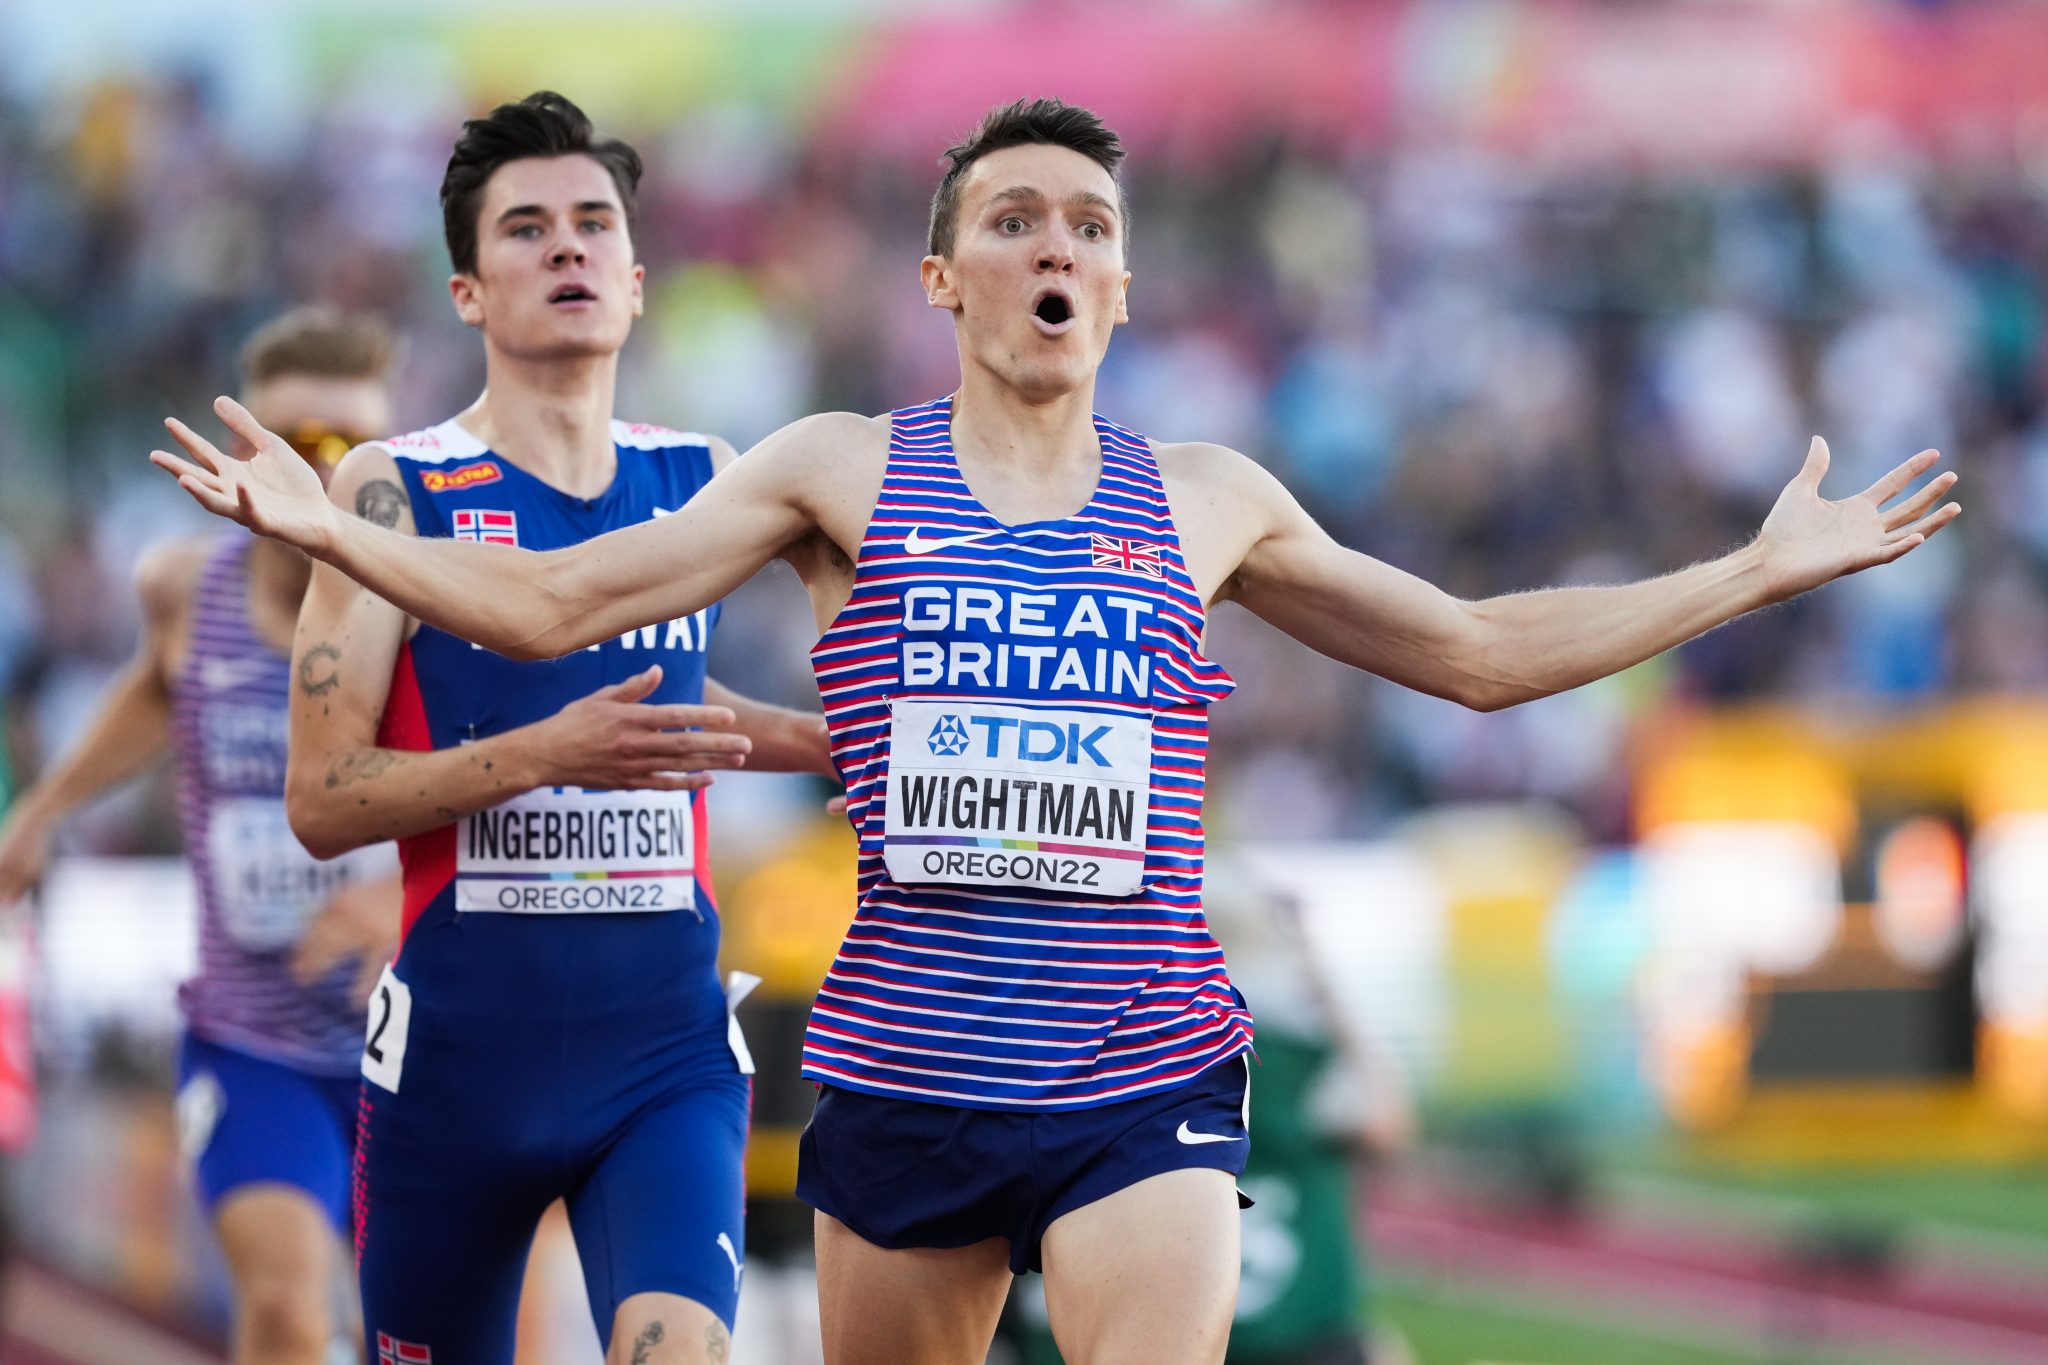 World 1500m champion Jake Wightman to miss title defence due to injury